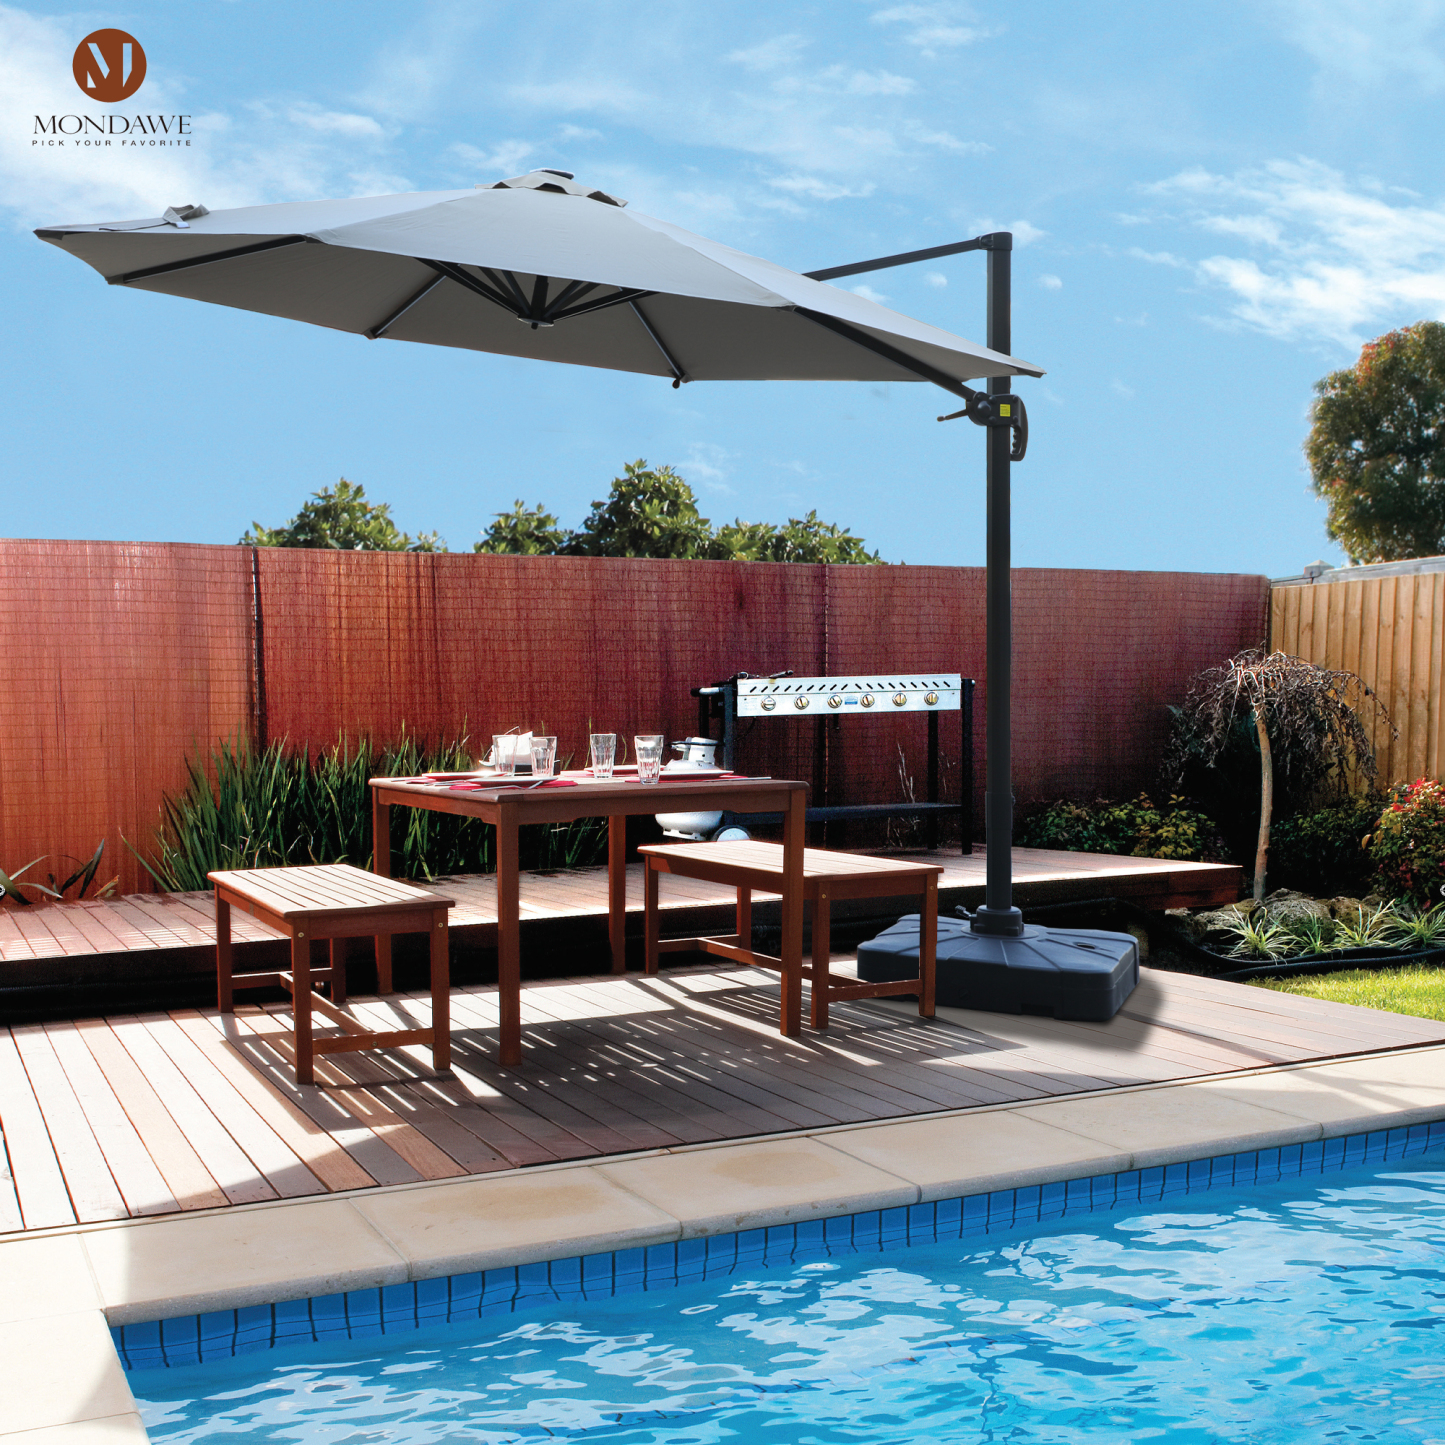 Mondawe 11 ft. Outdoor 360° Rotation Patio Cantilever Umbrella with Led Lights and Base for Garden-Mondawe